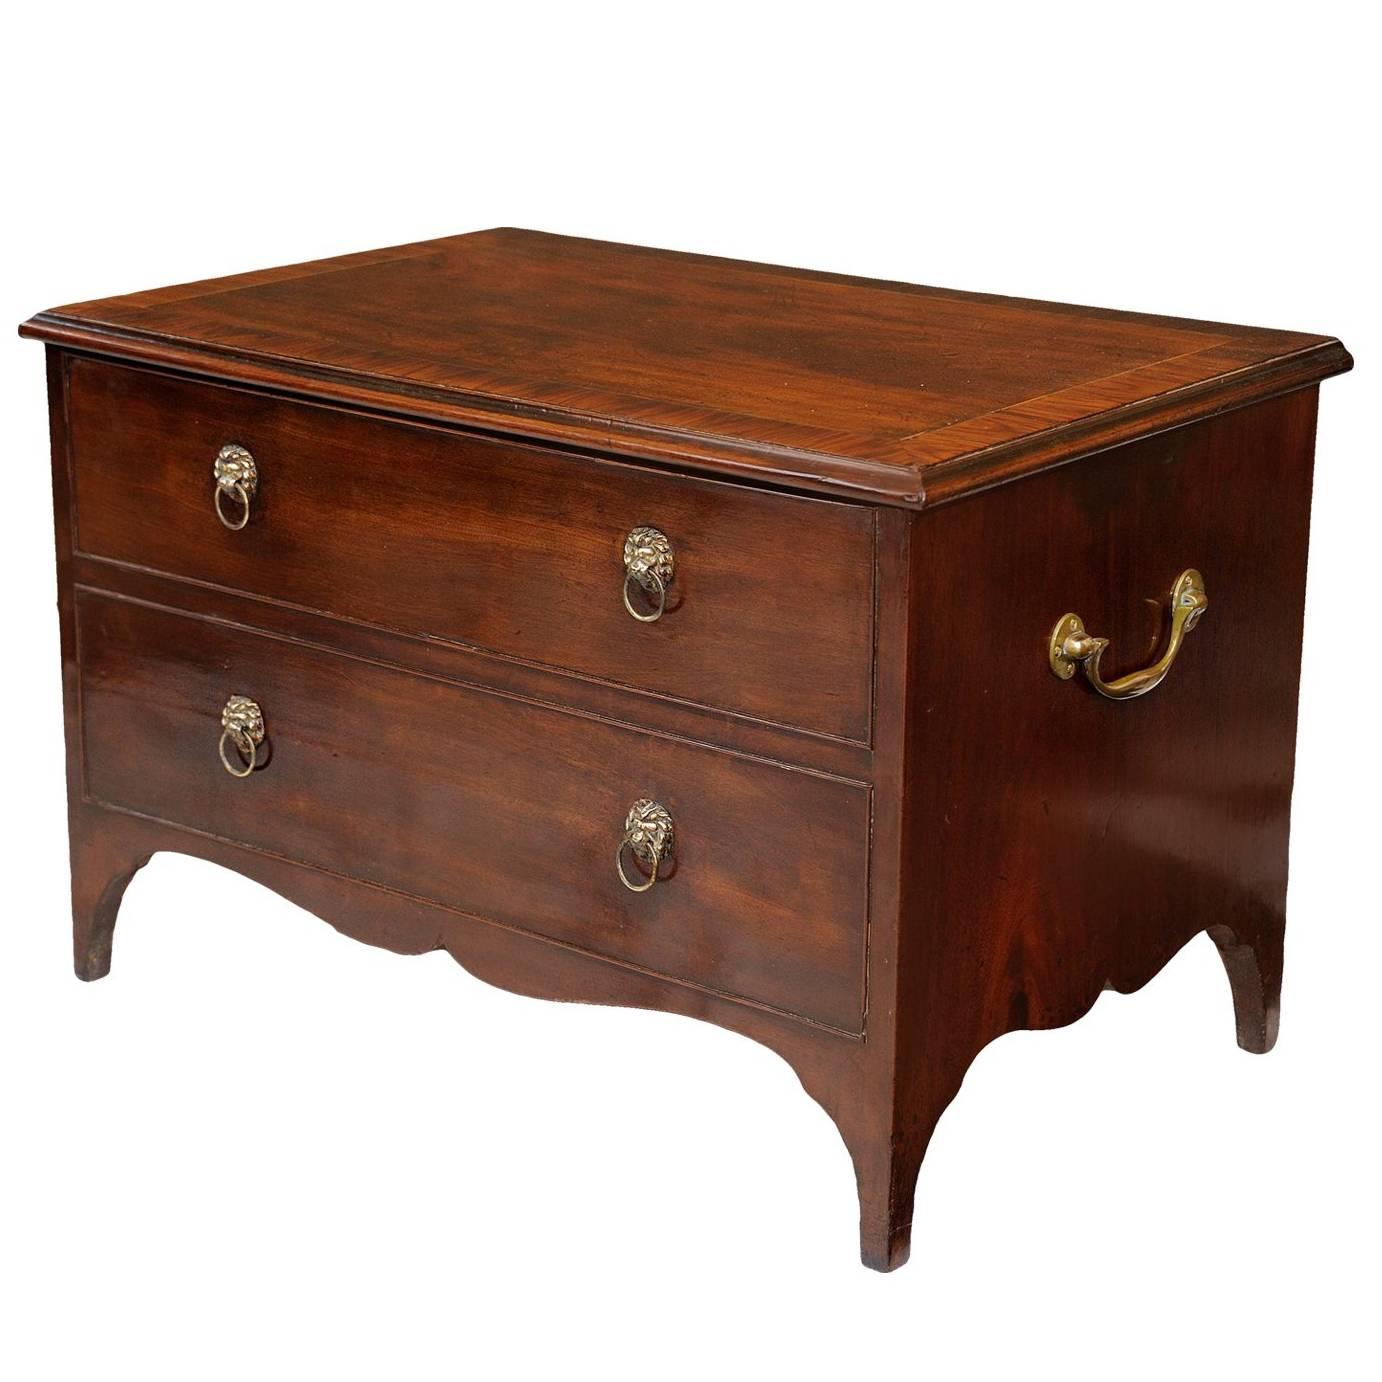 This is a rather striking English late 18th century George III Cellarette chest, featuring a beautiful cross banded mahogany top, with two dummy drawers to the front, smart brass lion head handles and complete with brass carrying handles. The